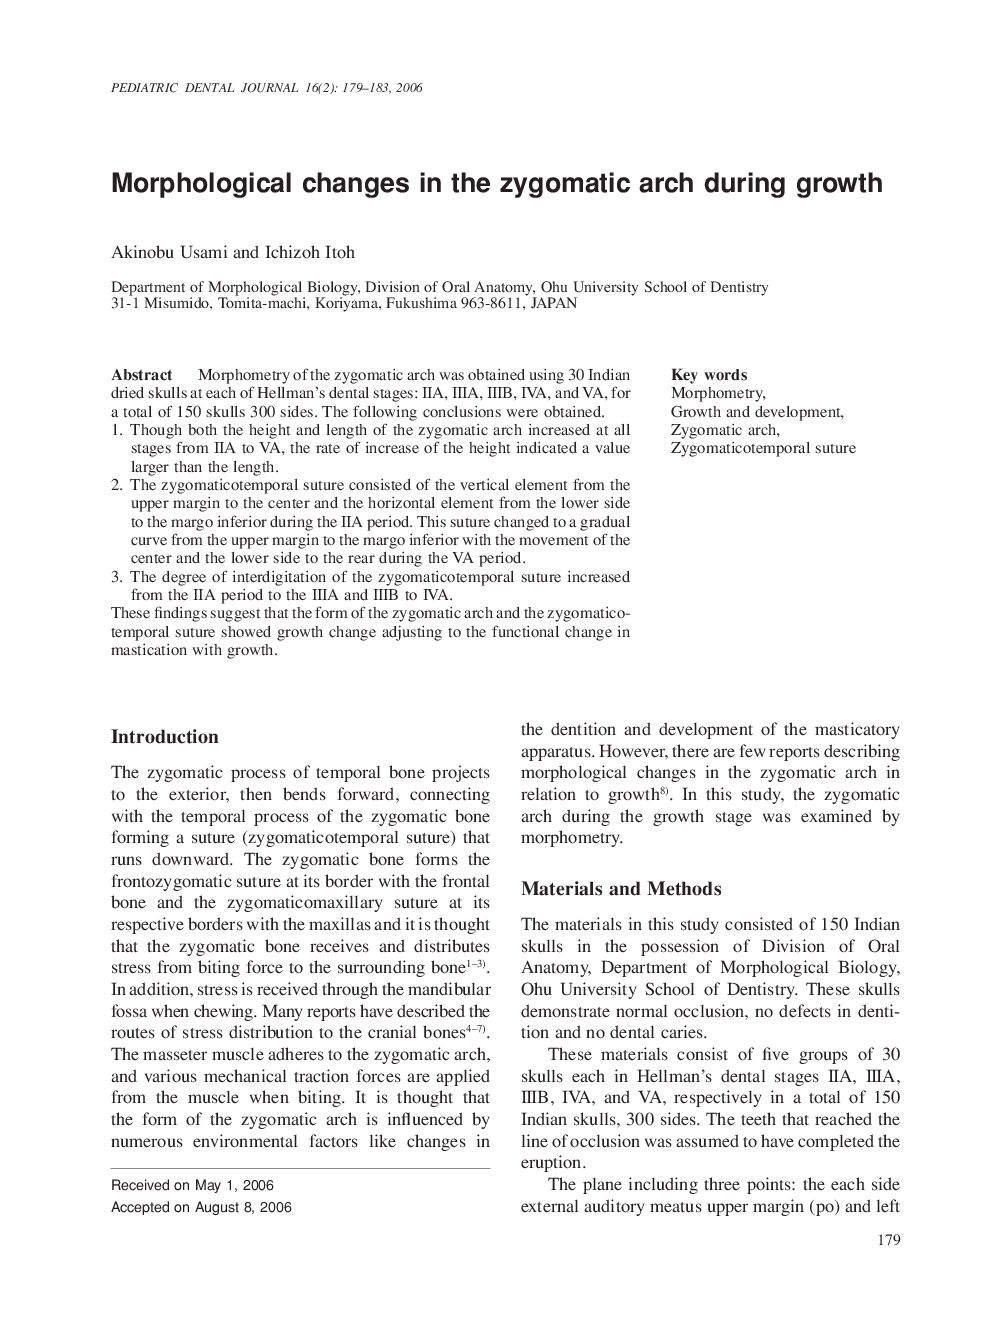 Morphological changes in the zygomatic arch during growth